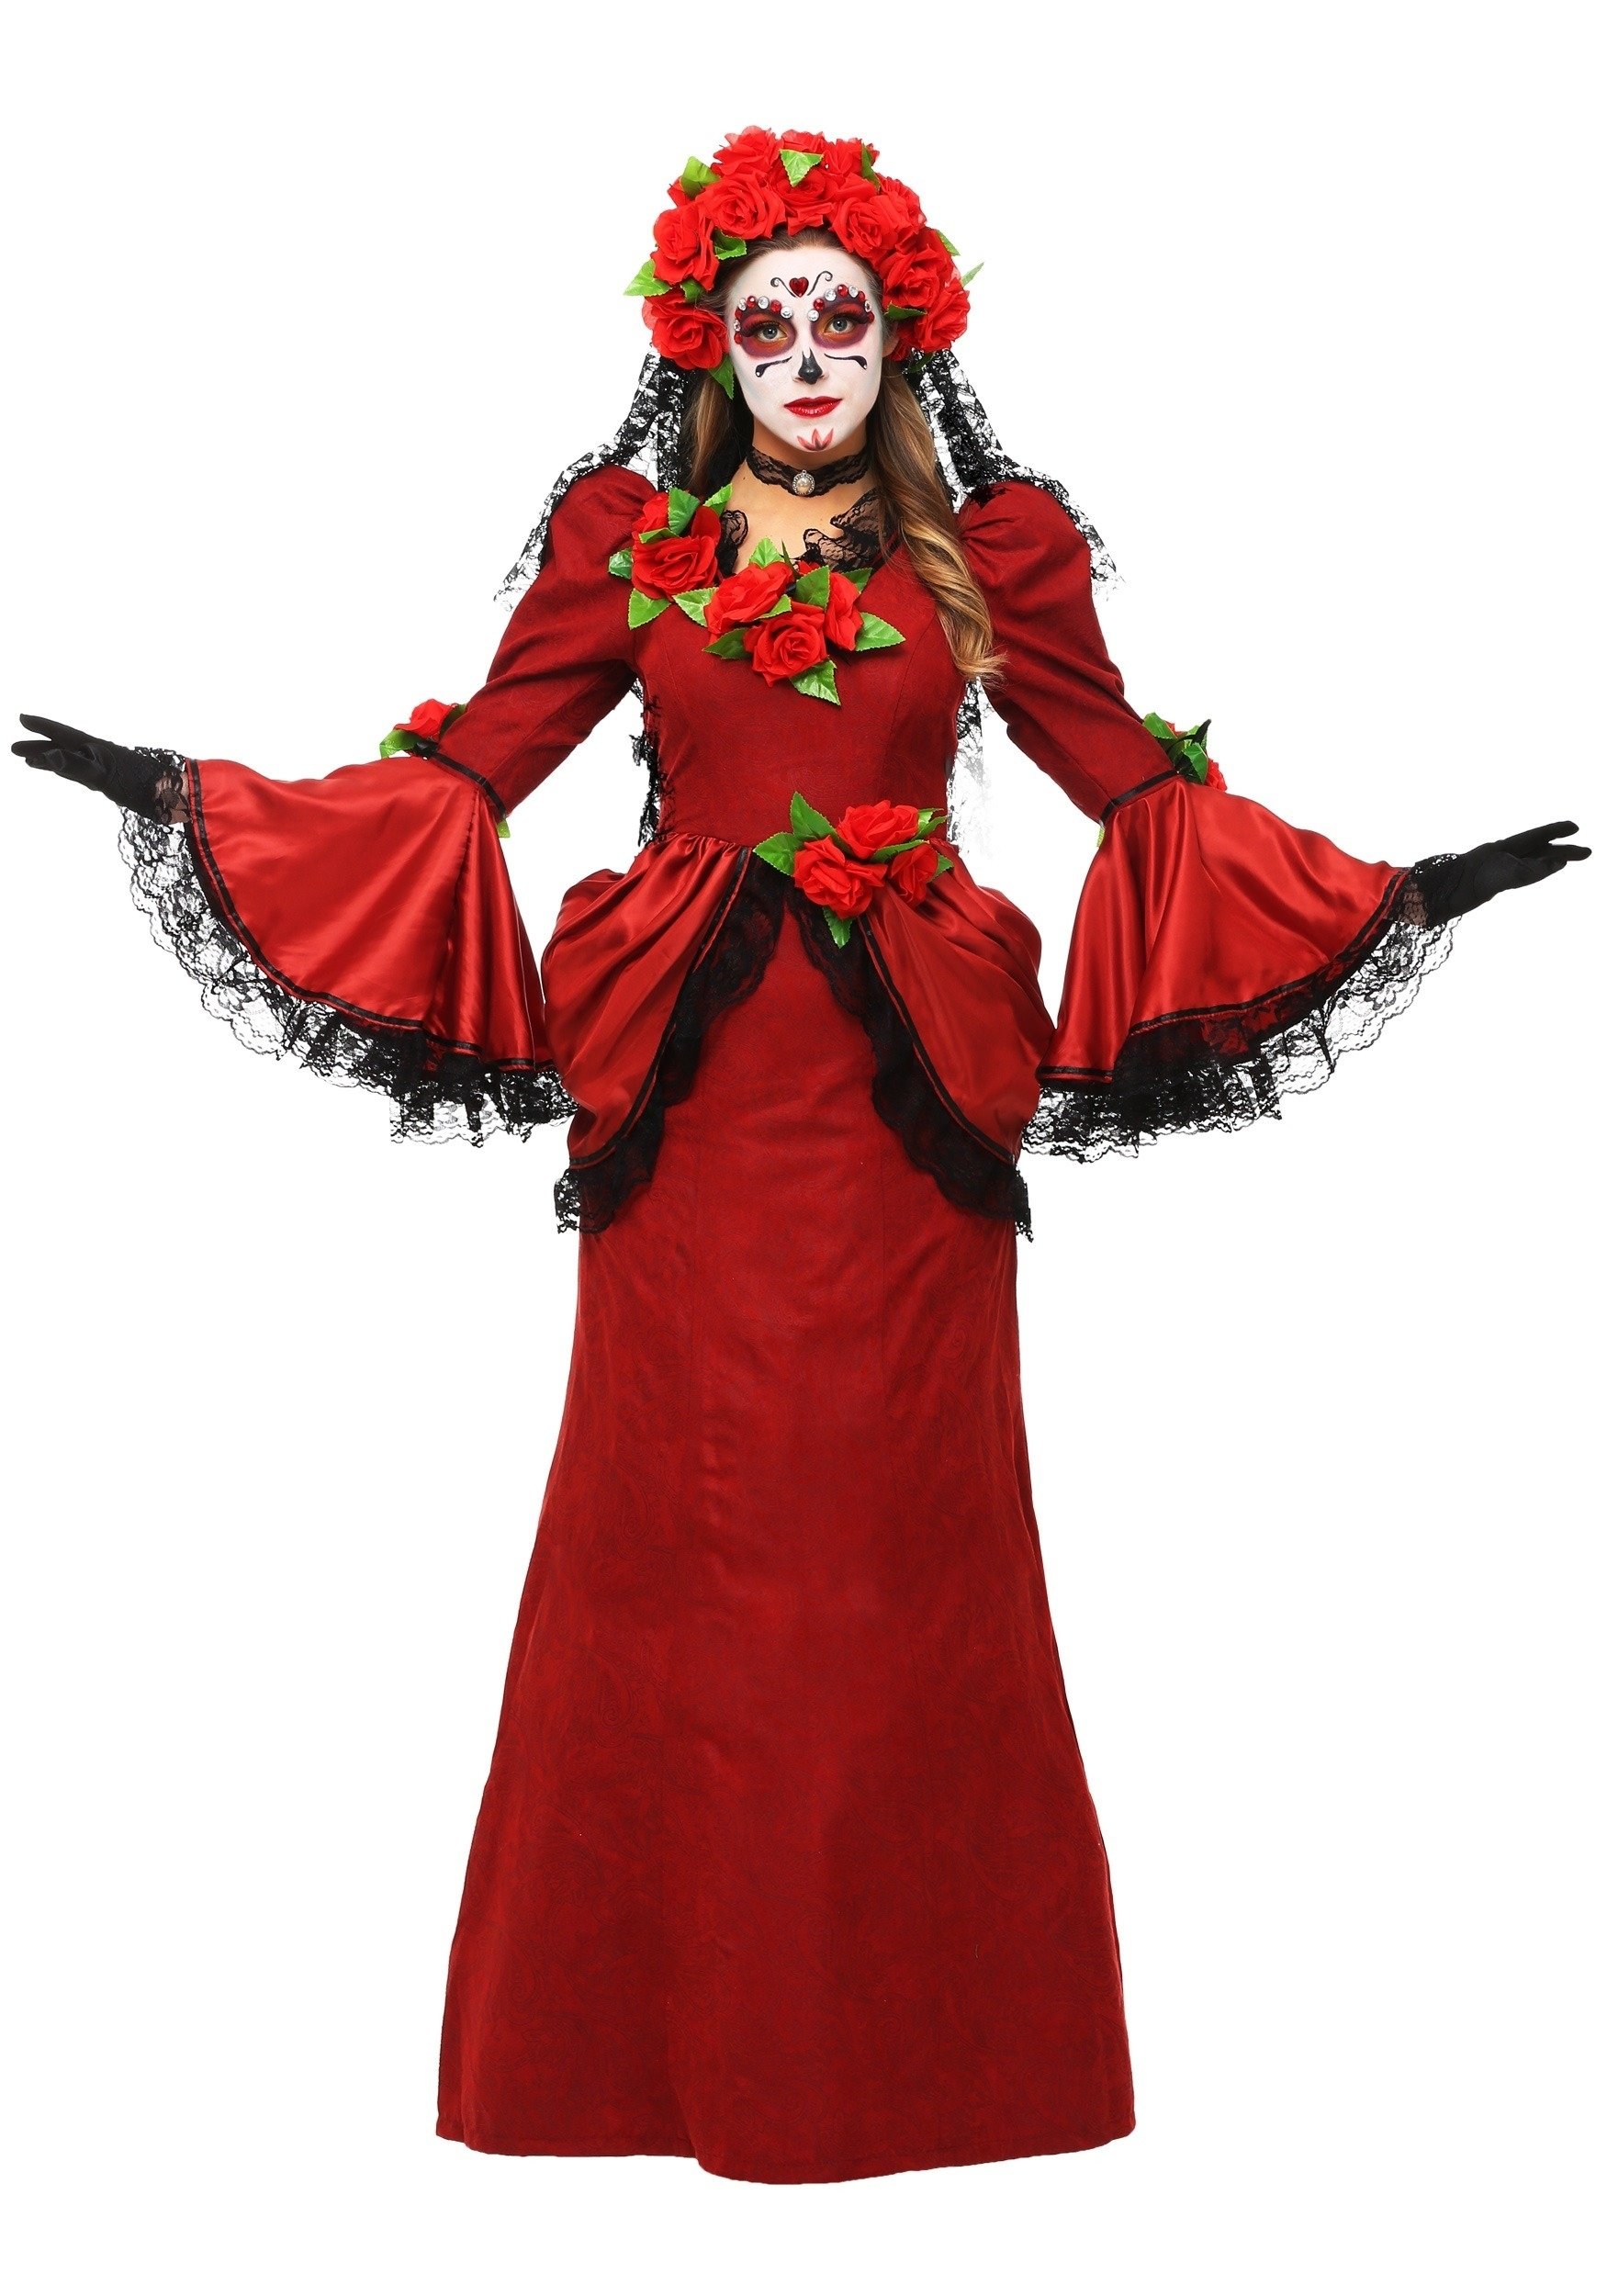 10 Pretty Day Of The Dead Outfit Ideas womens plus size day of the dead costume 1 2022